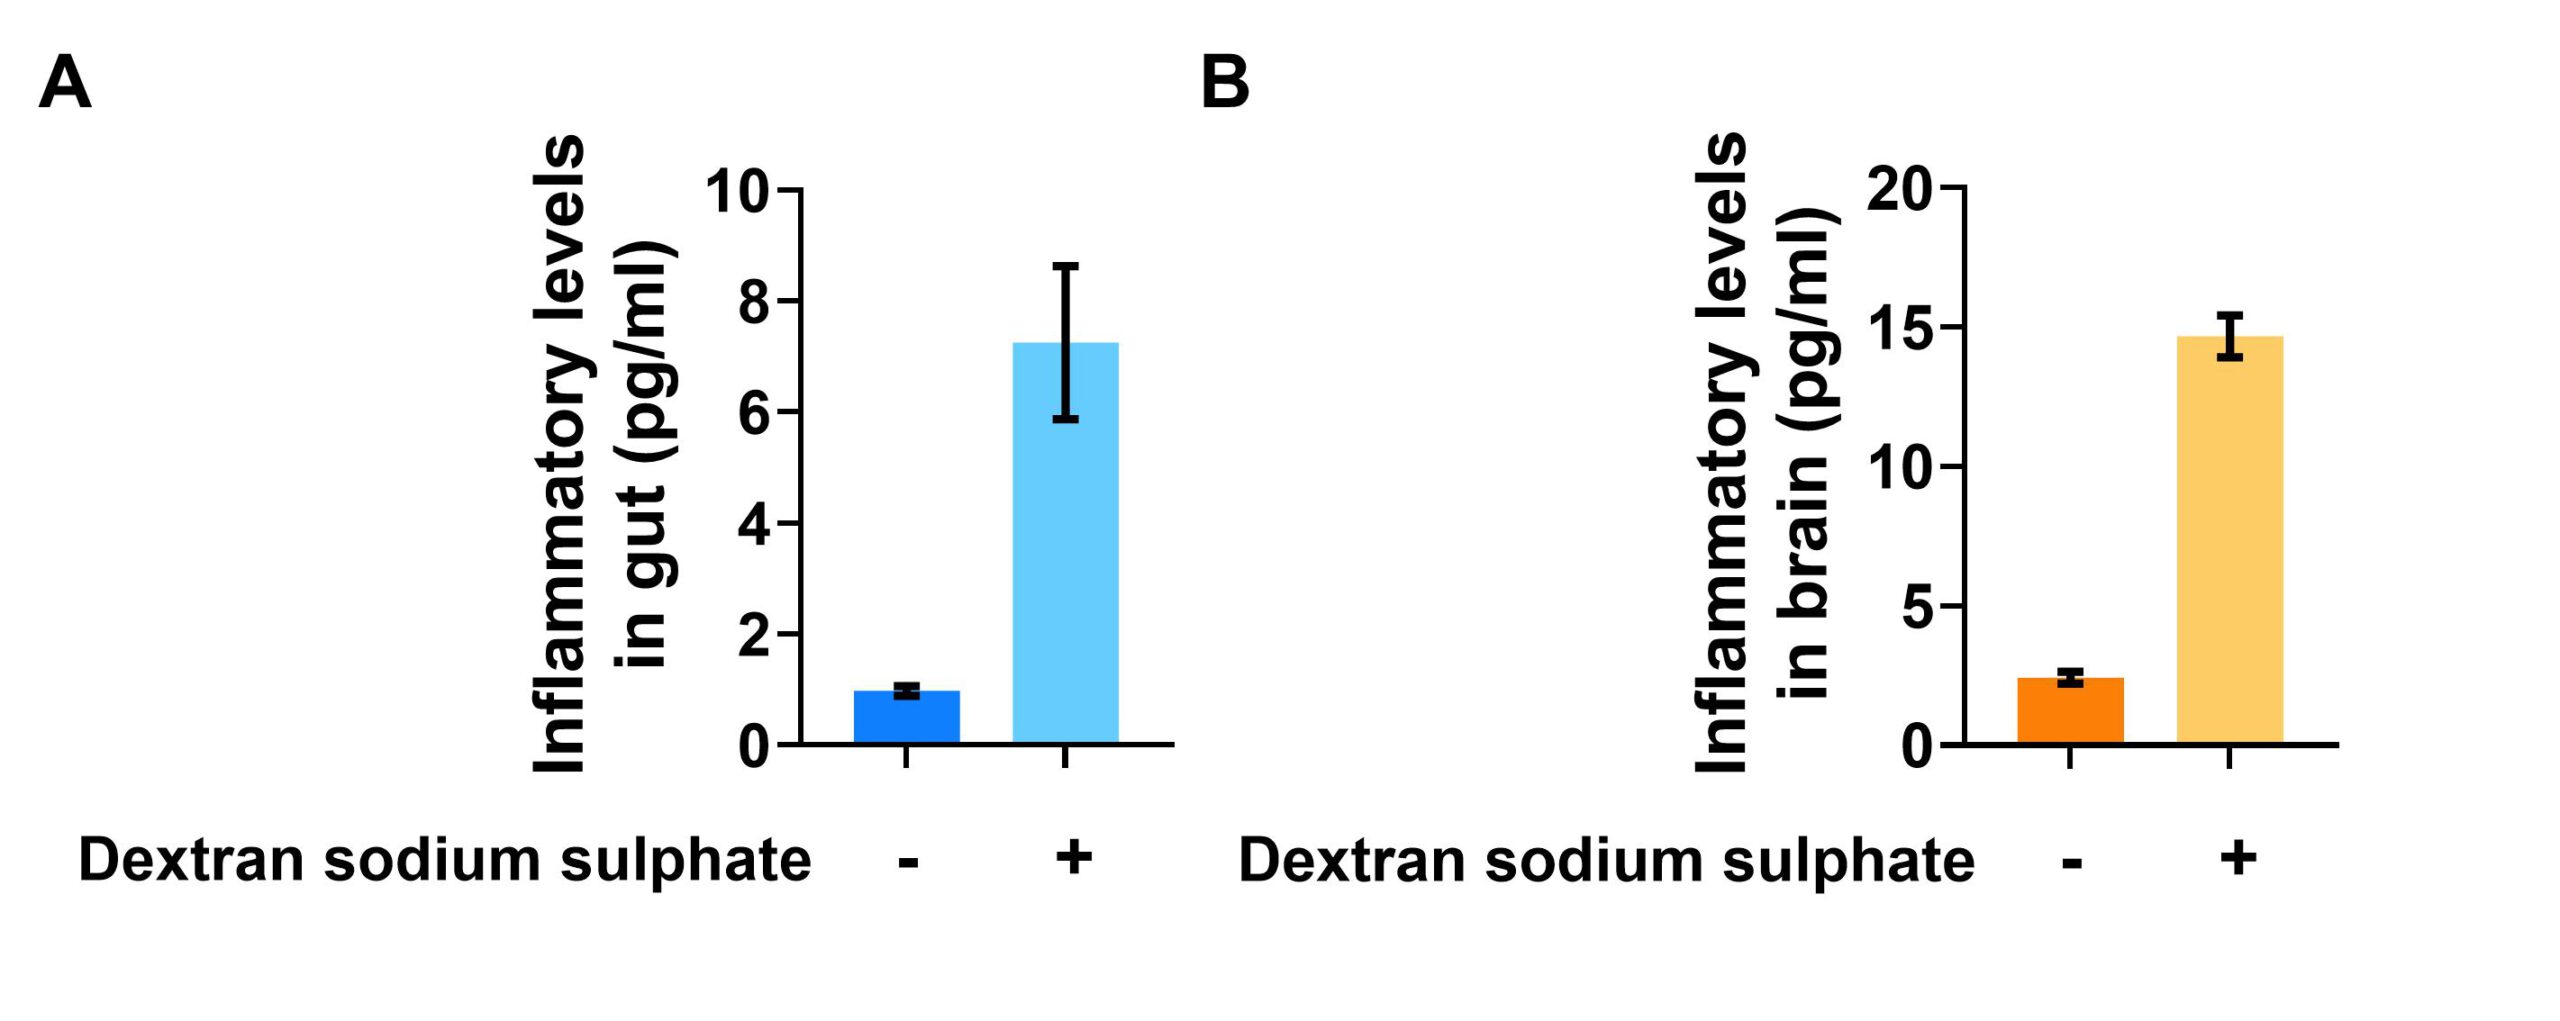 A graph showing levels of inflammatory response in the (A) gut and (B) brain in the presence or absence of a compound called dextran sodium sulphate.